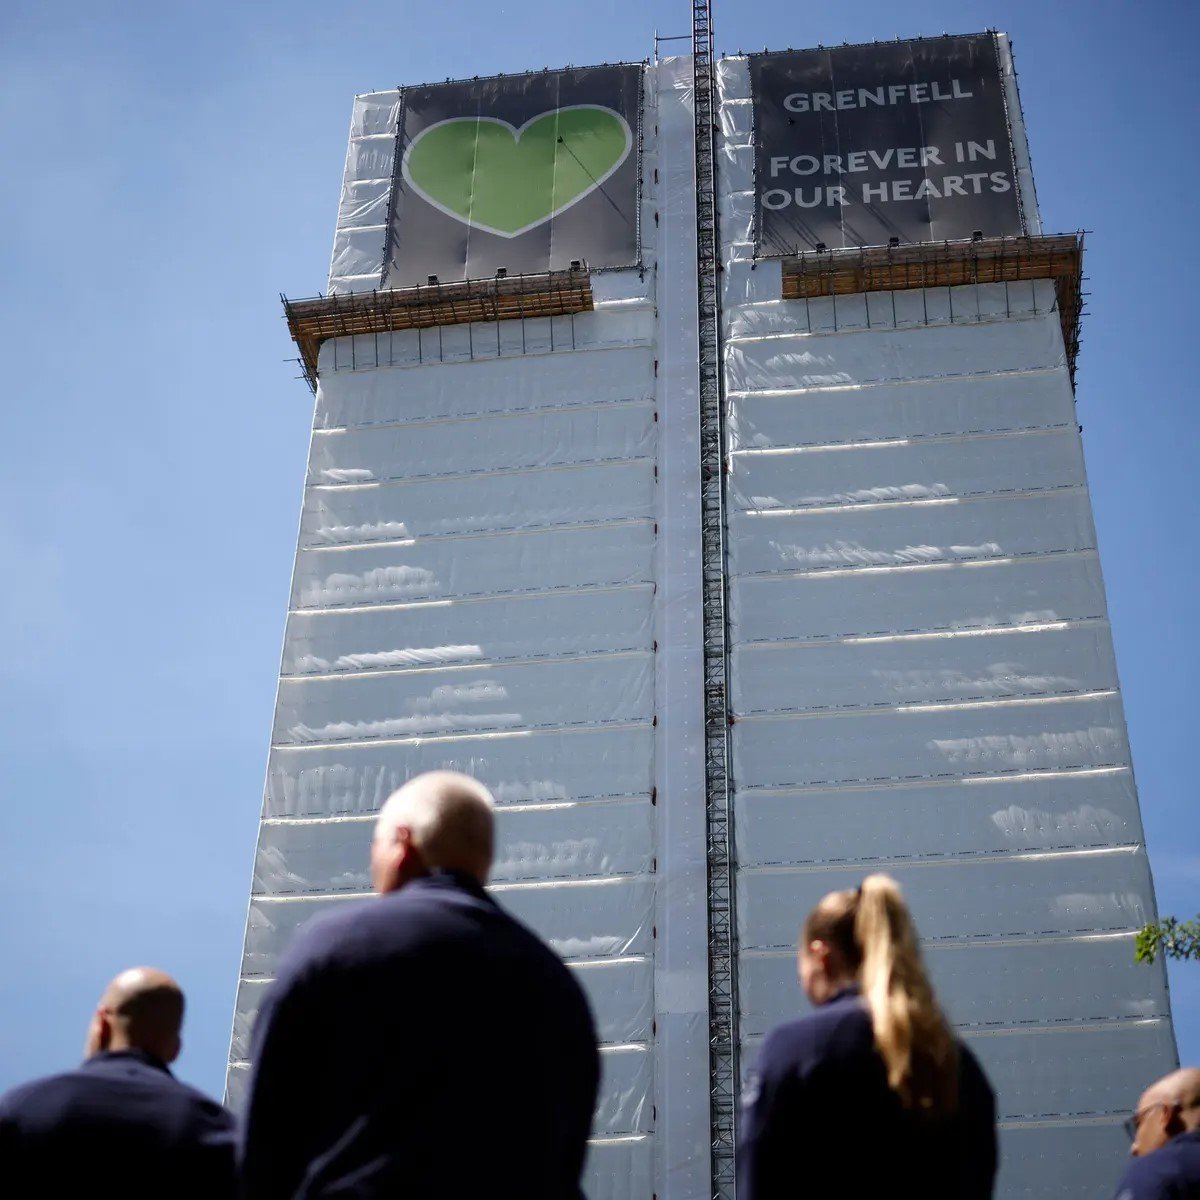 Grenfell Tower now